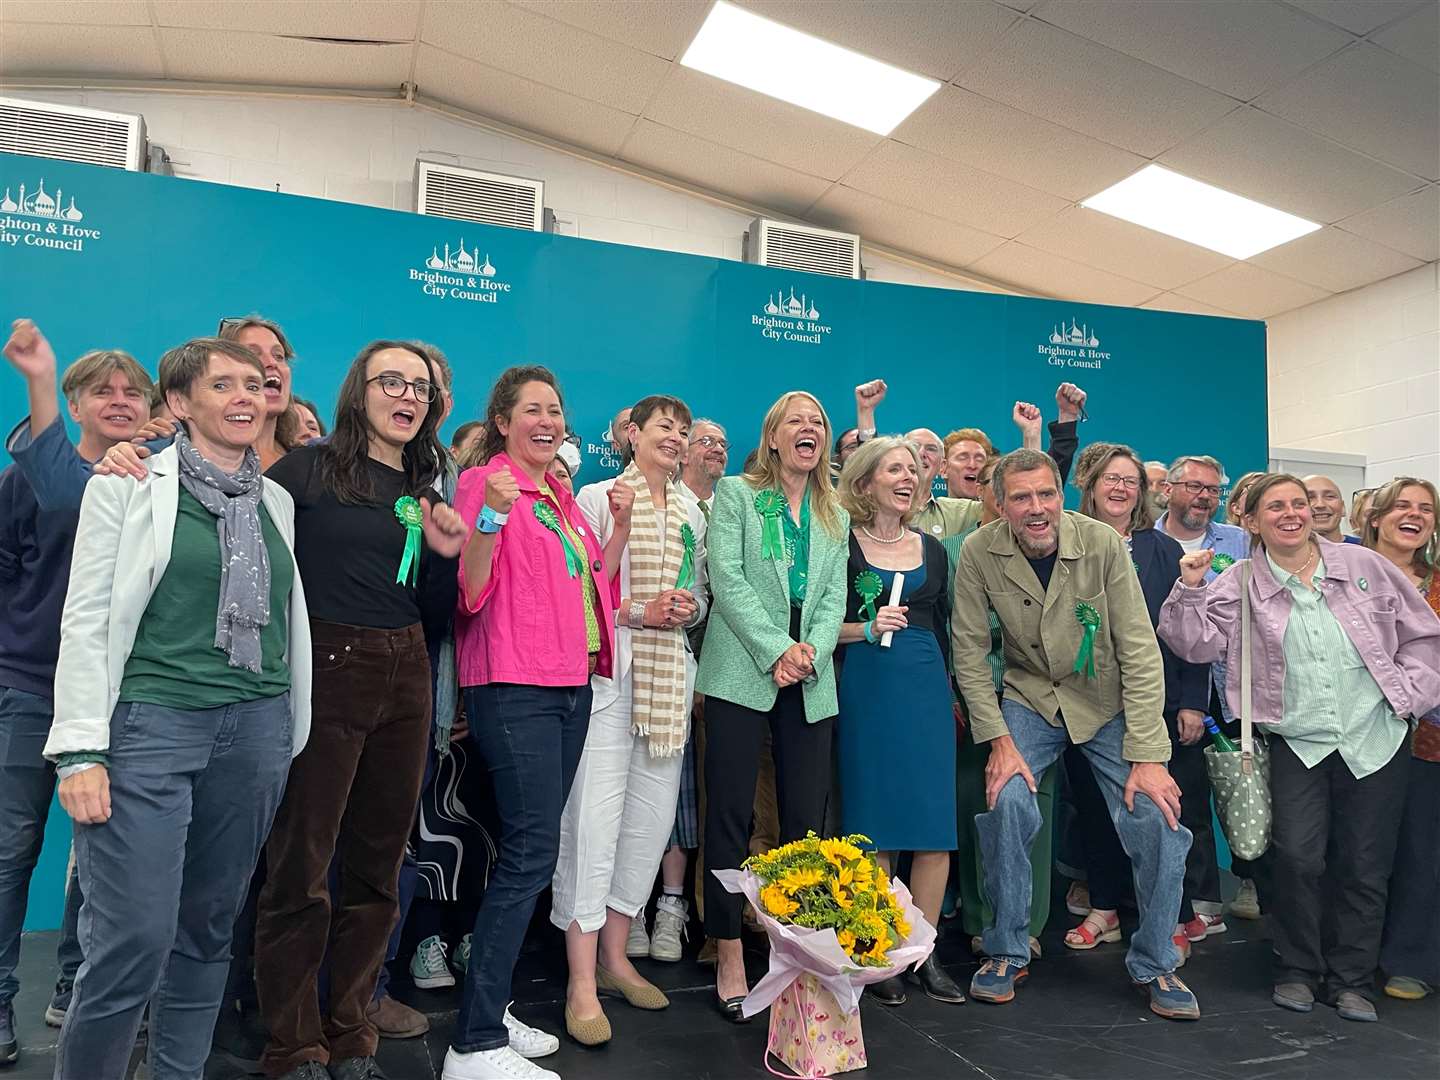 Sian Berry and Green Party supporters celebrate at the Portslade Sports Centre after winning the seat in the Brighton Pavilion constituency (Anahita Hossein-Pour/PA)